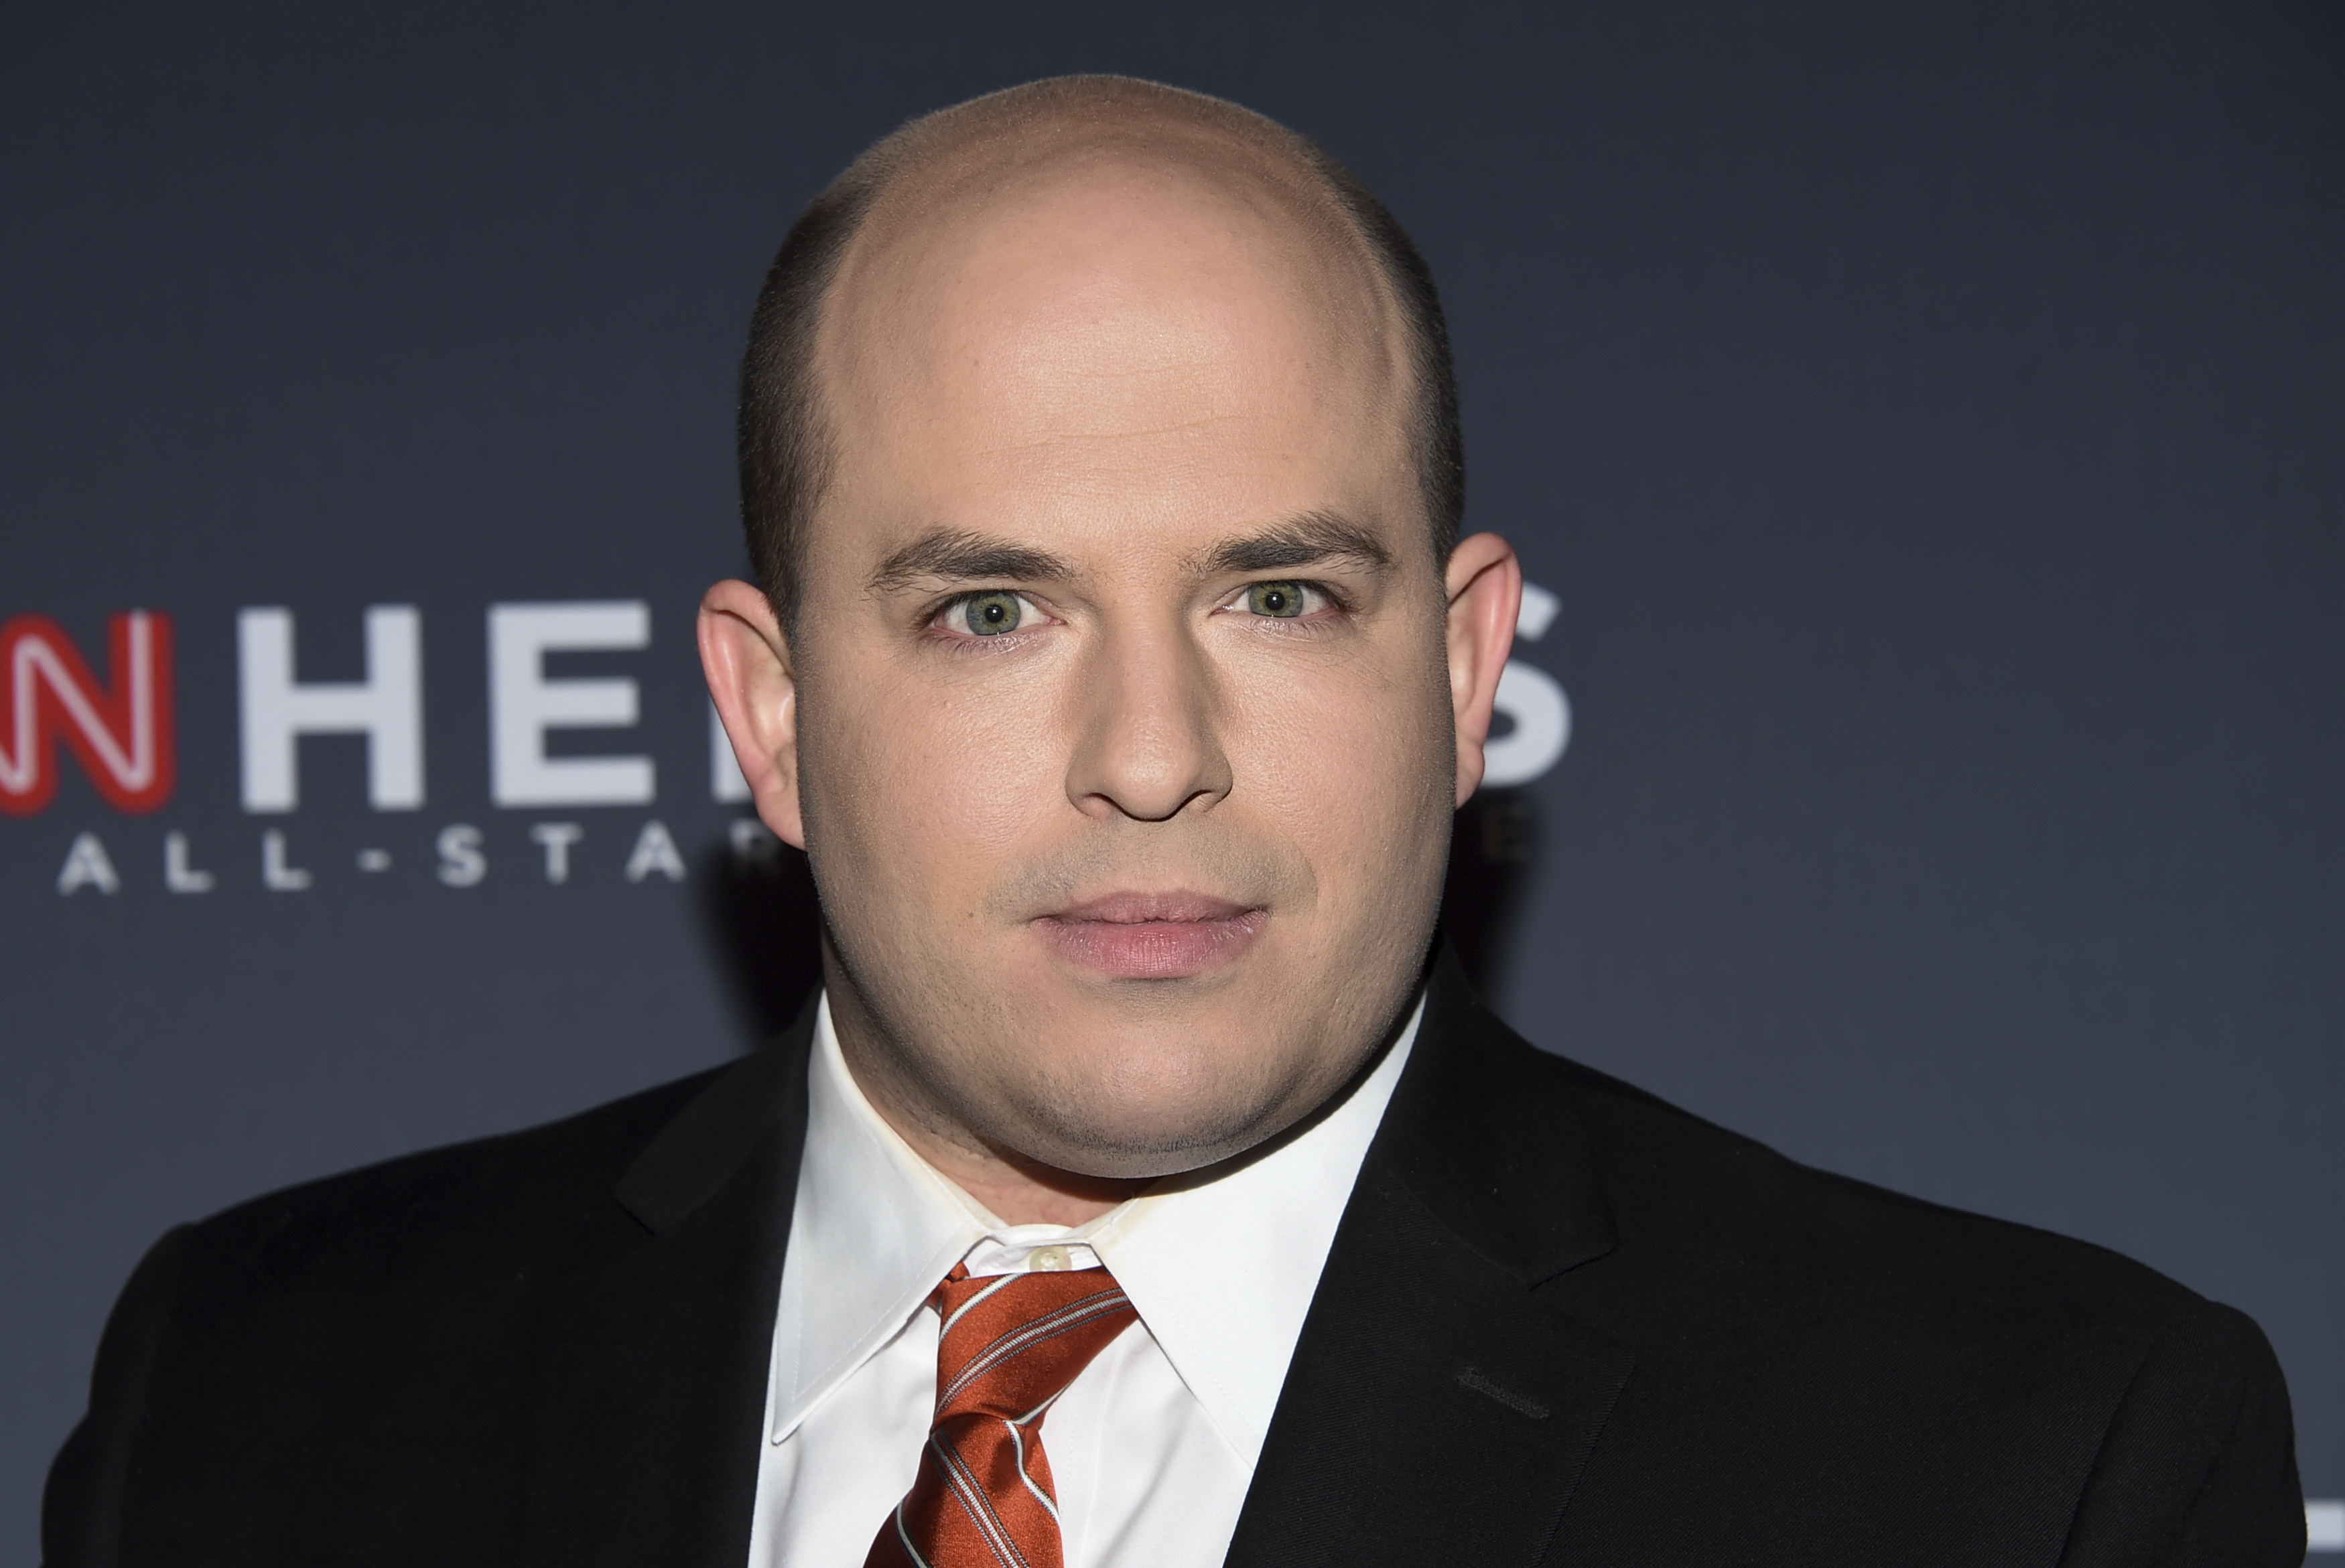 Brian Stelter Leaving CNN as Network Cancels His Show ‘Reliable Sources’